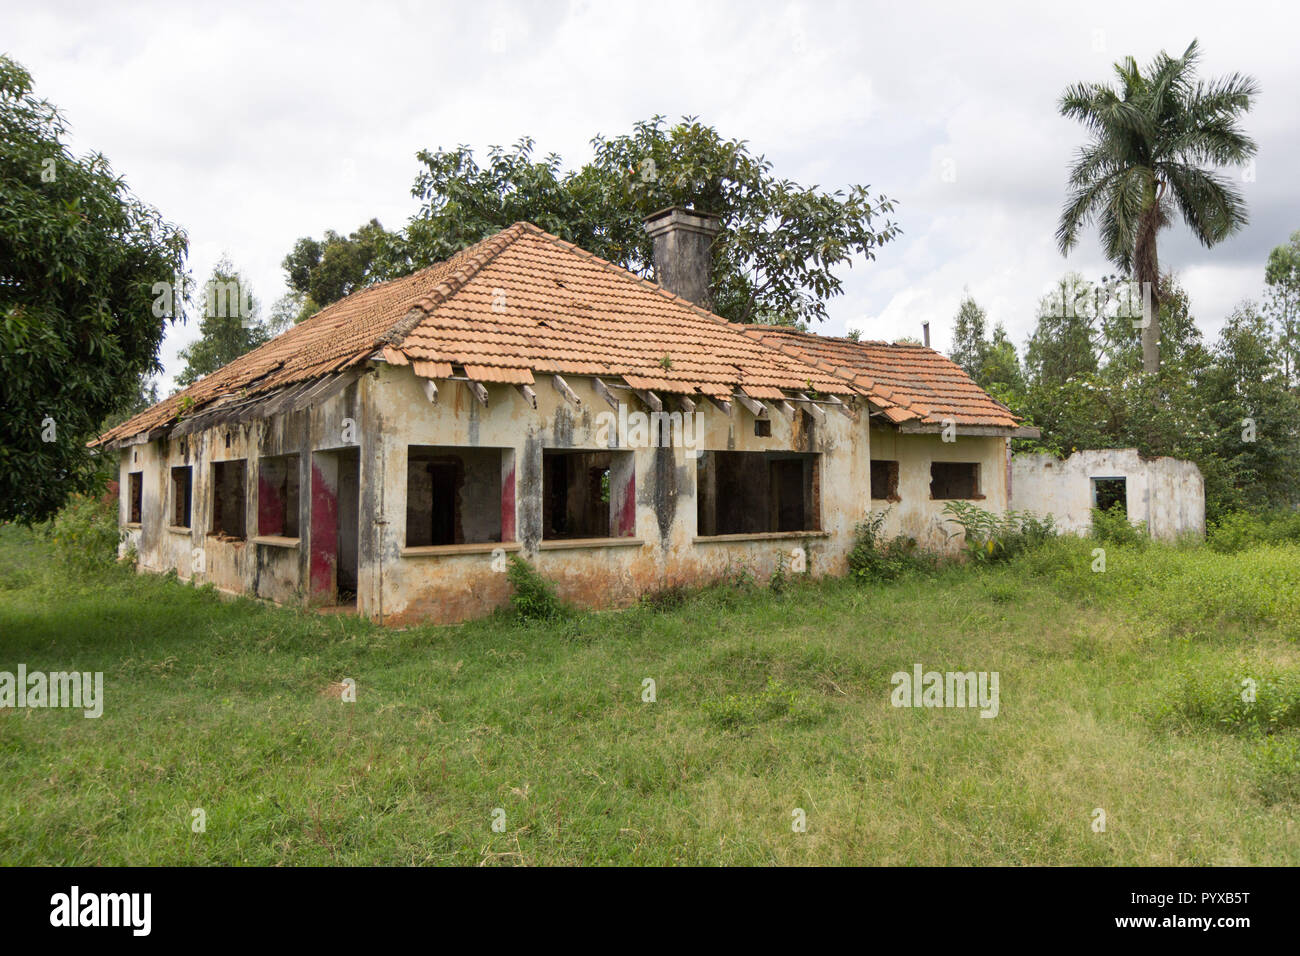 An abandoned house in ruins. Photo taken in Ssezibwa, Uganda on 23 April 2017. Stock Photo